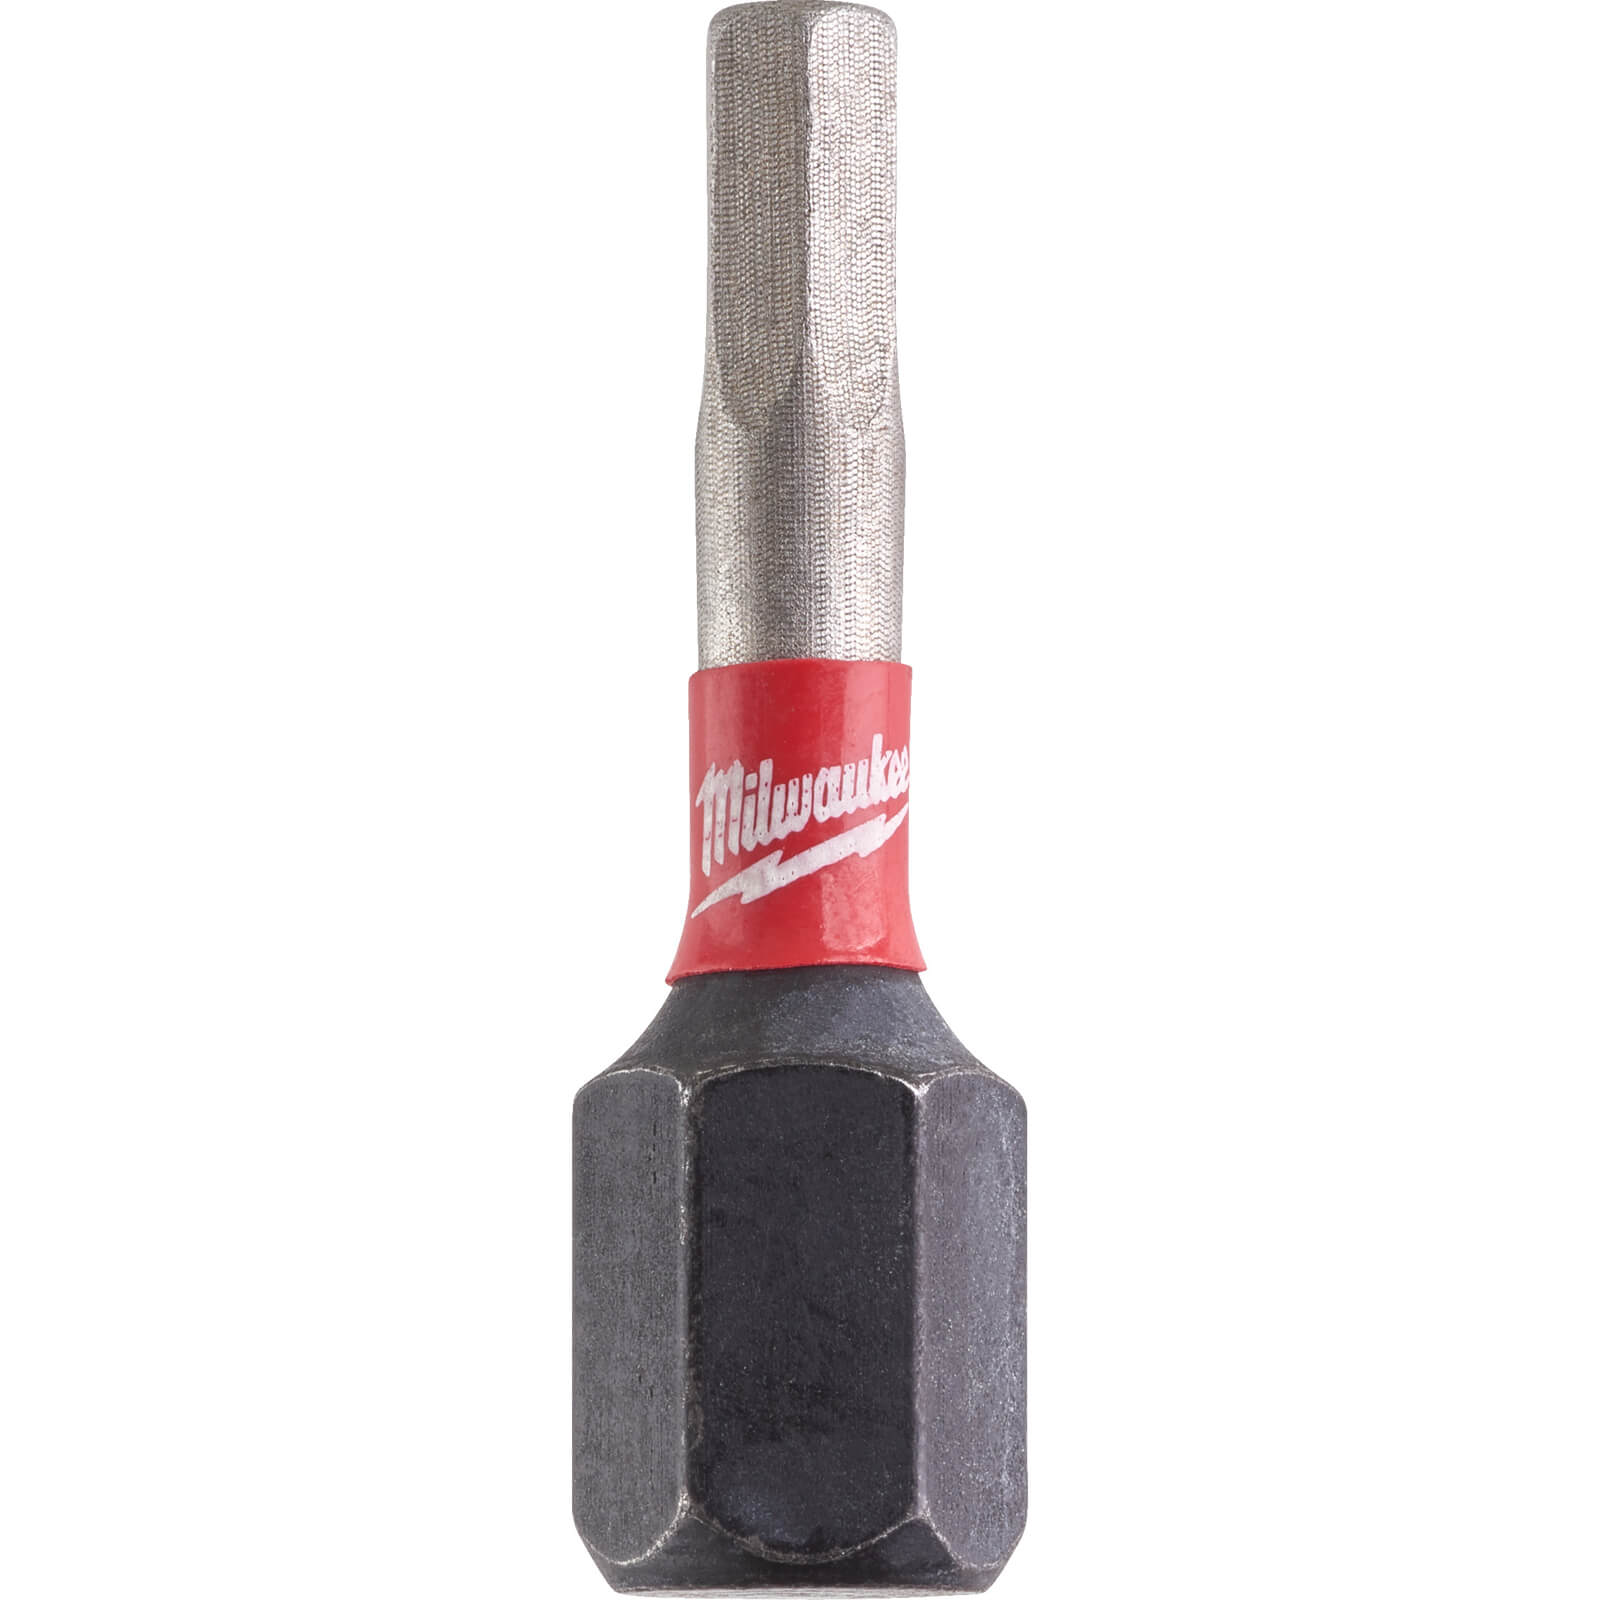 Milwaukee Shockwave Impact Duty Hex Screwdriver Bits Hex 3mm 25mm Pack of 2